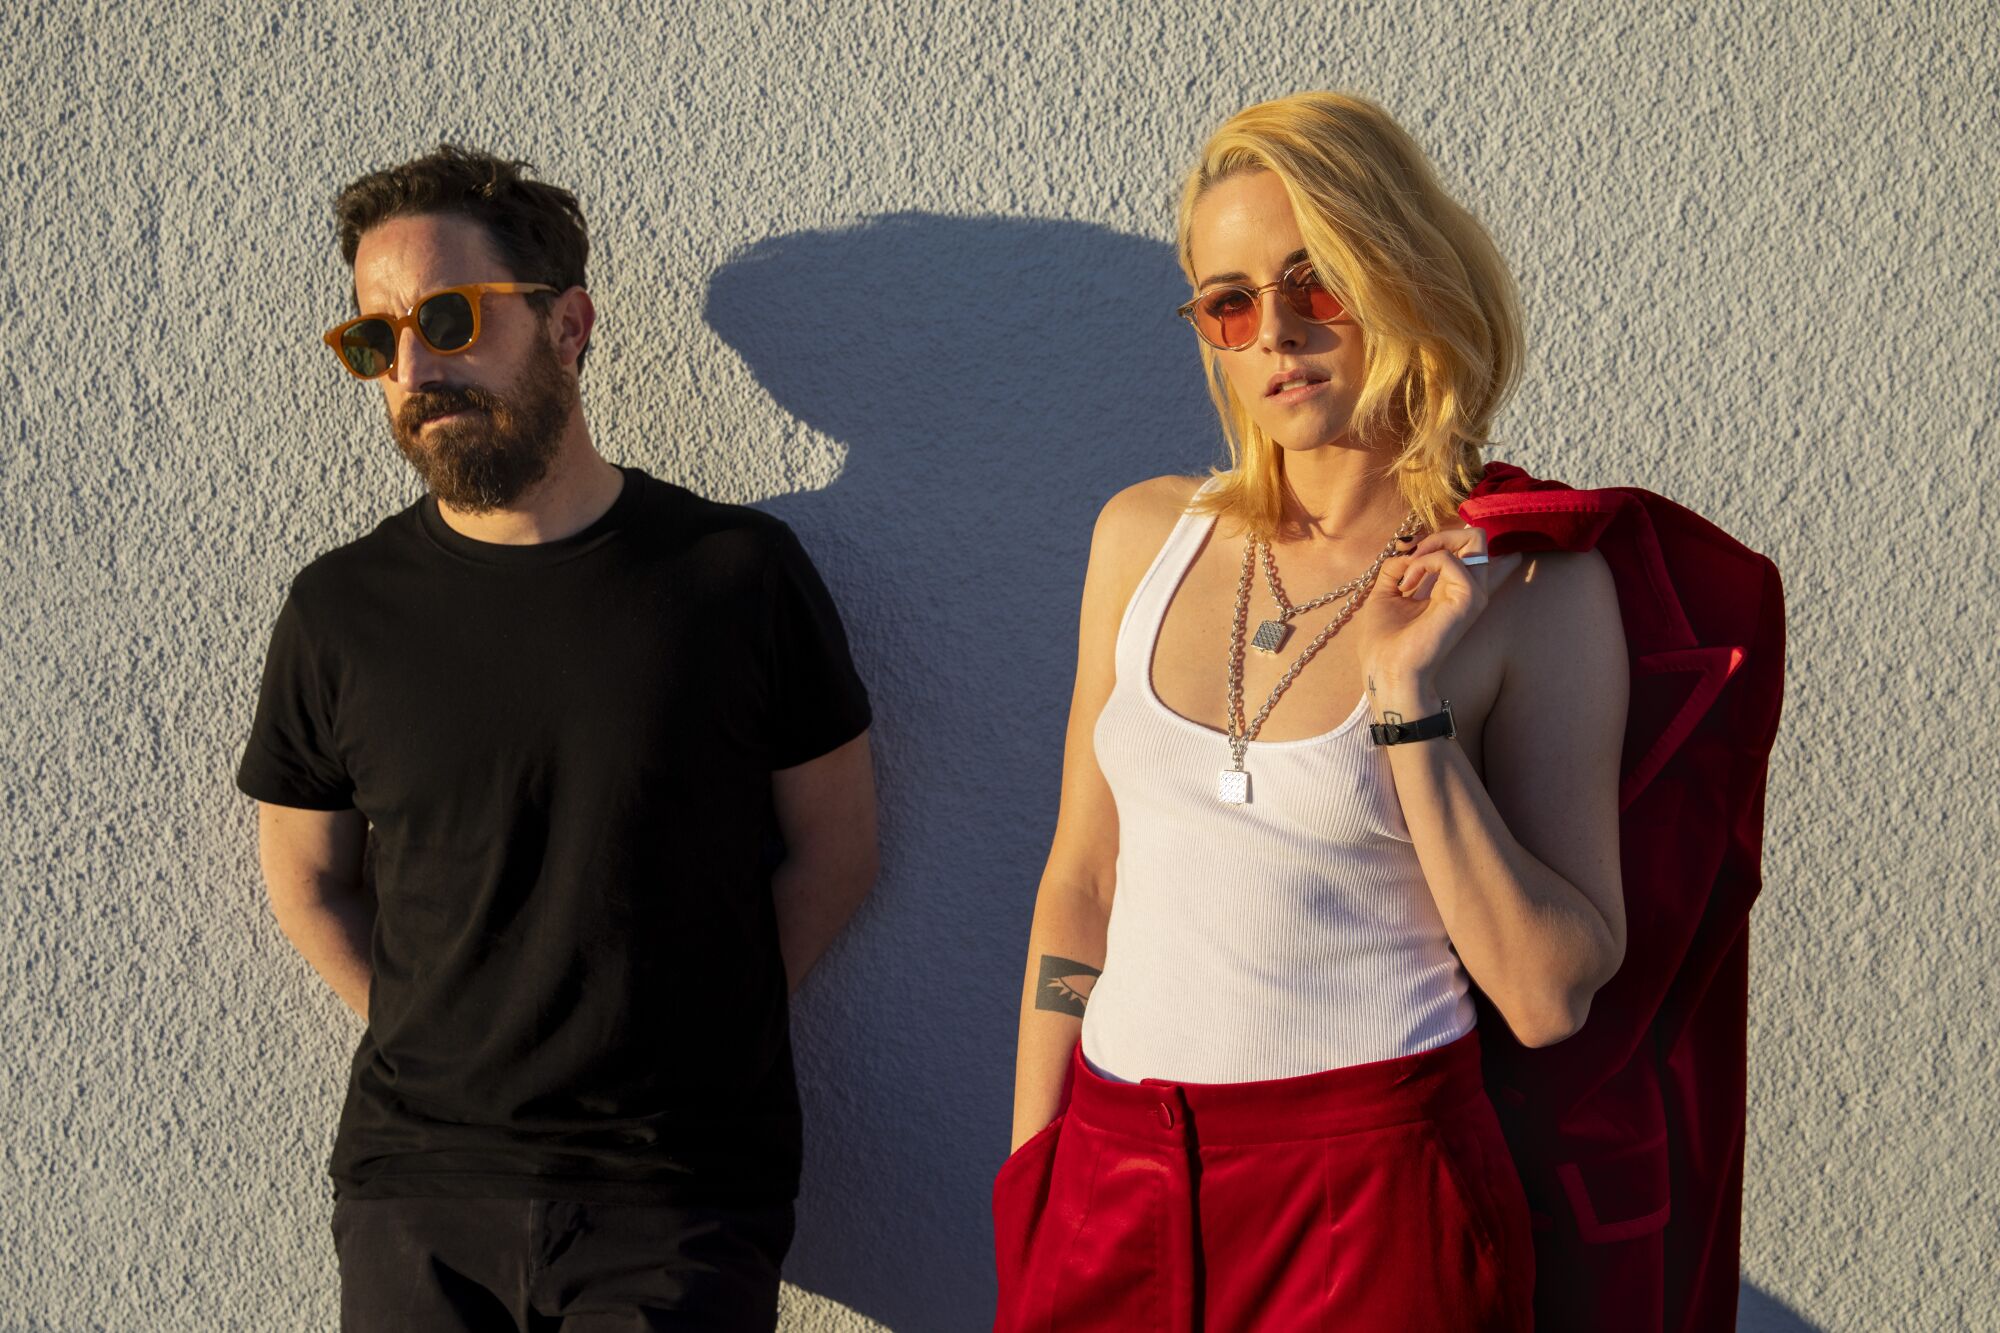 A man in black and a woman in a white tank top and red pants, both wearing sunglasses, lean against a wall on a sunny day.